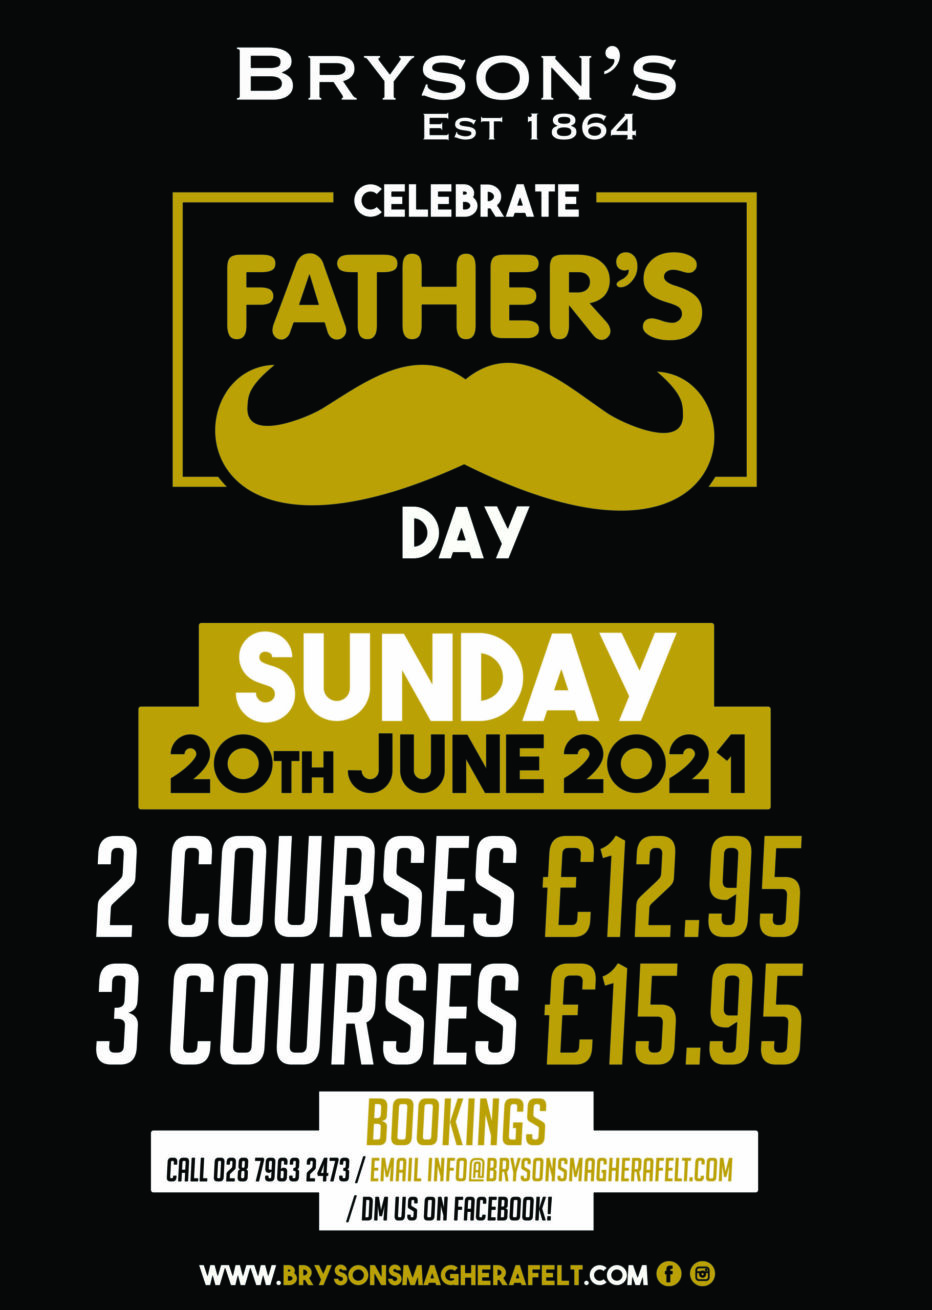 Father’s day at Bryson’s